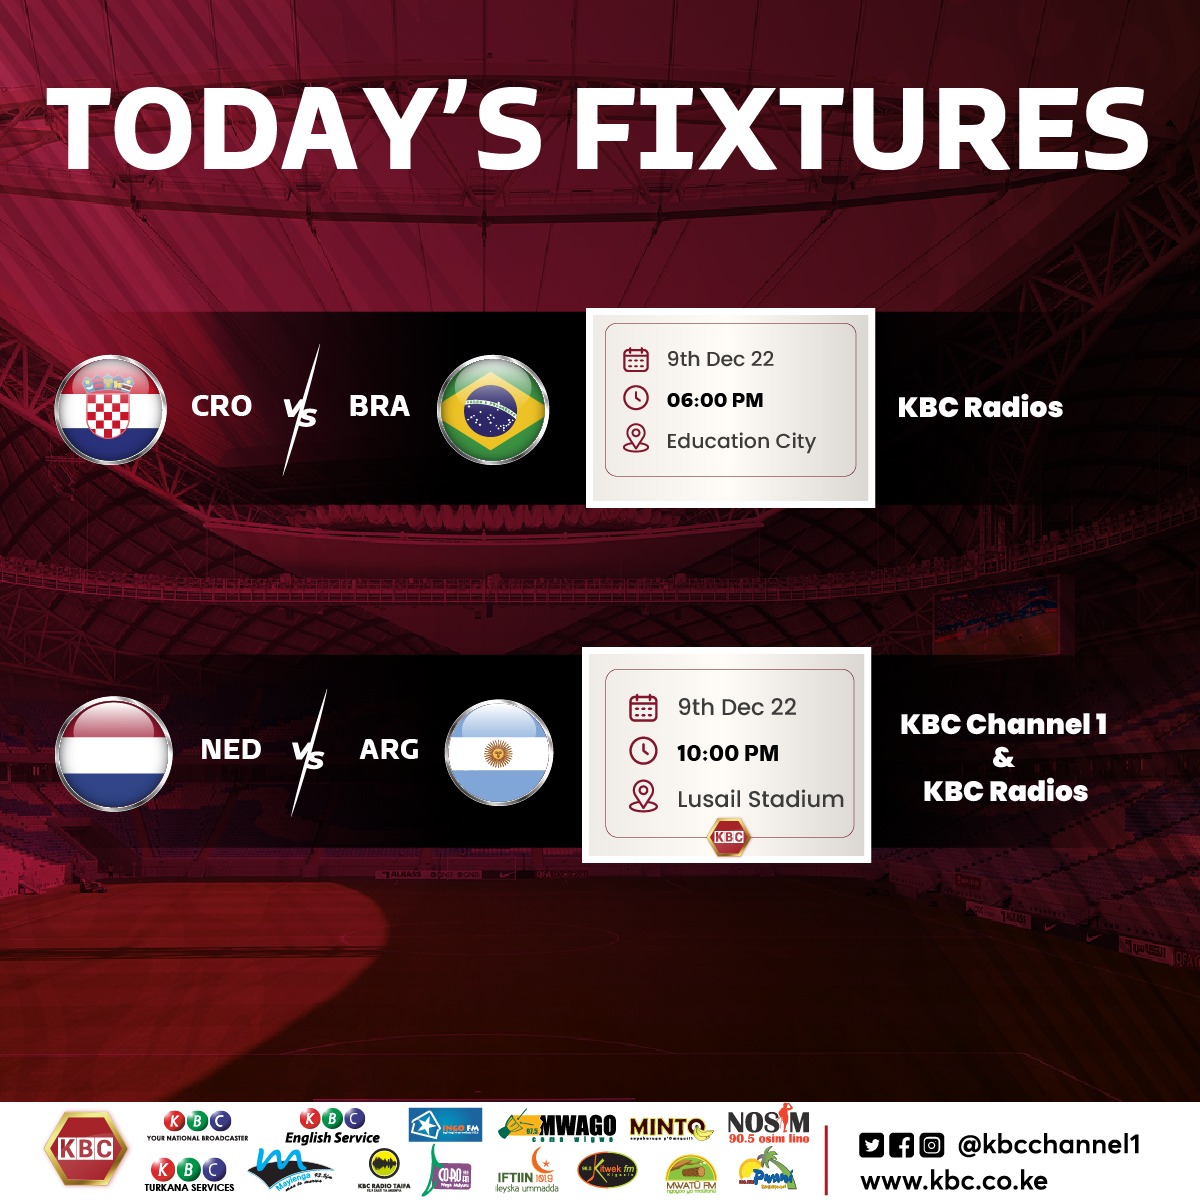 Good evening guys, the world Cup is back again and today we will be having two tough matches

Croatia V Brazil at 6pm
Netherlands V Argentina at 10pm.

Which teams do you think will make it through to the semi finals? 

#WorldCupIkoKBC 
#QataaKuLose